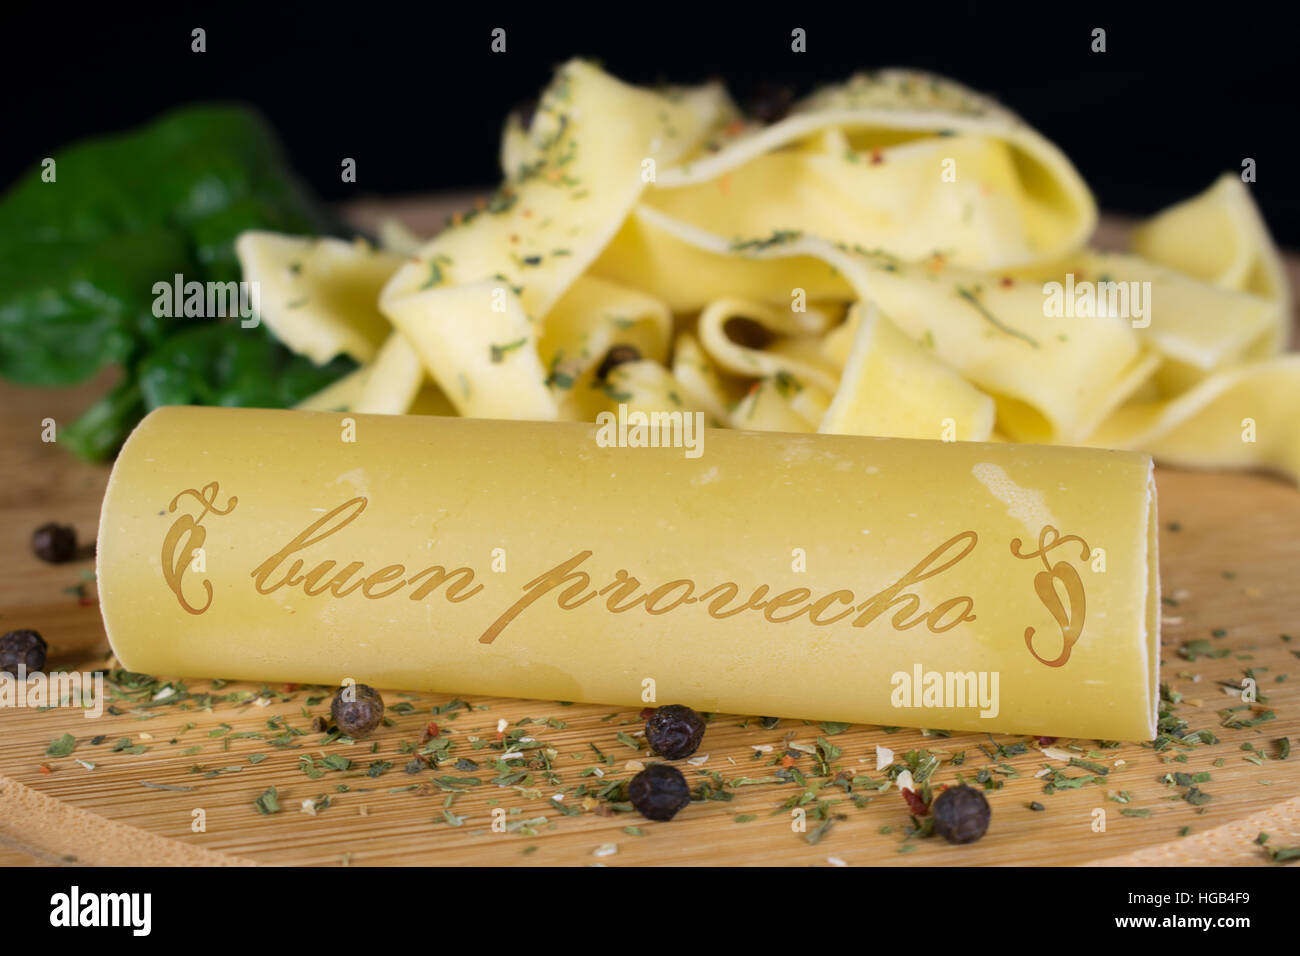 On a wooden board is in the foreground a cannelloni with the lettering - enjoy your meal  - in spanish words, in the background are further noodles ga Stock Photo